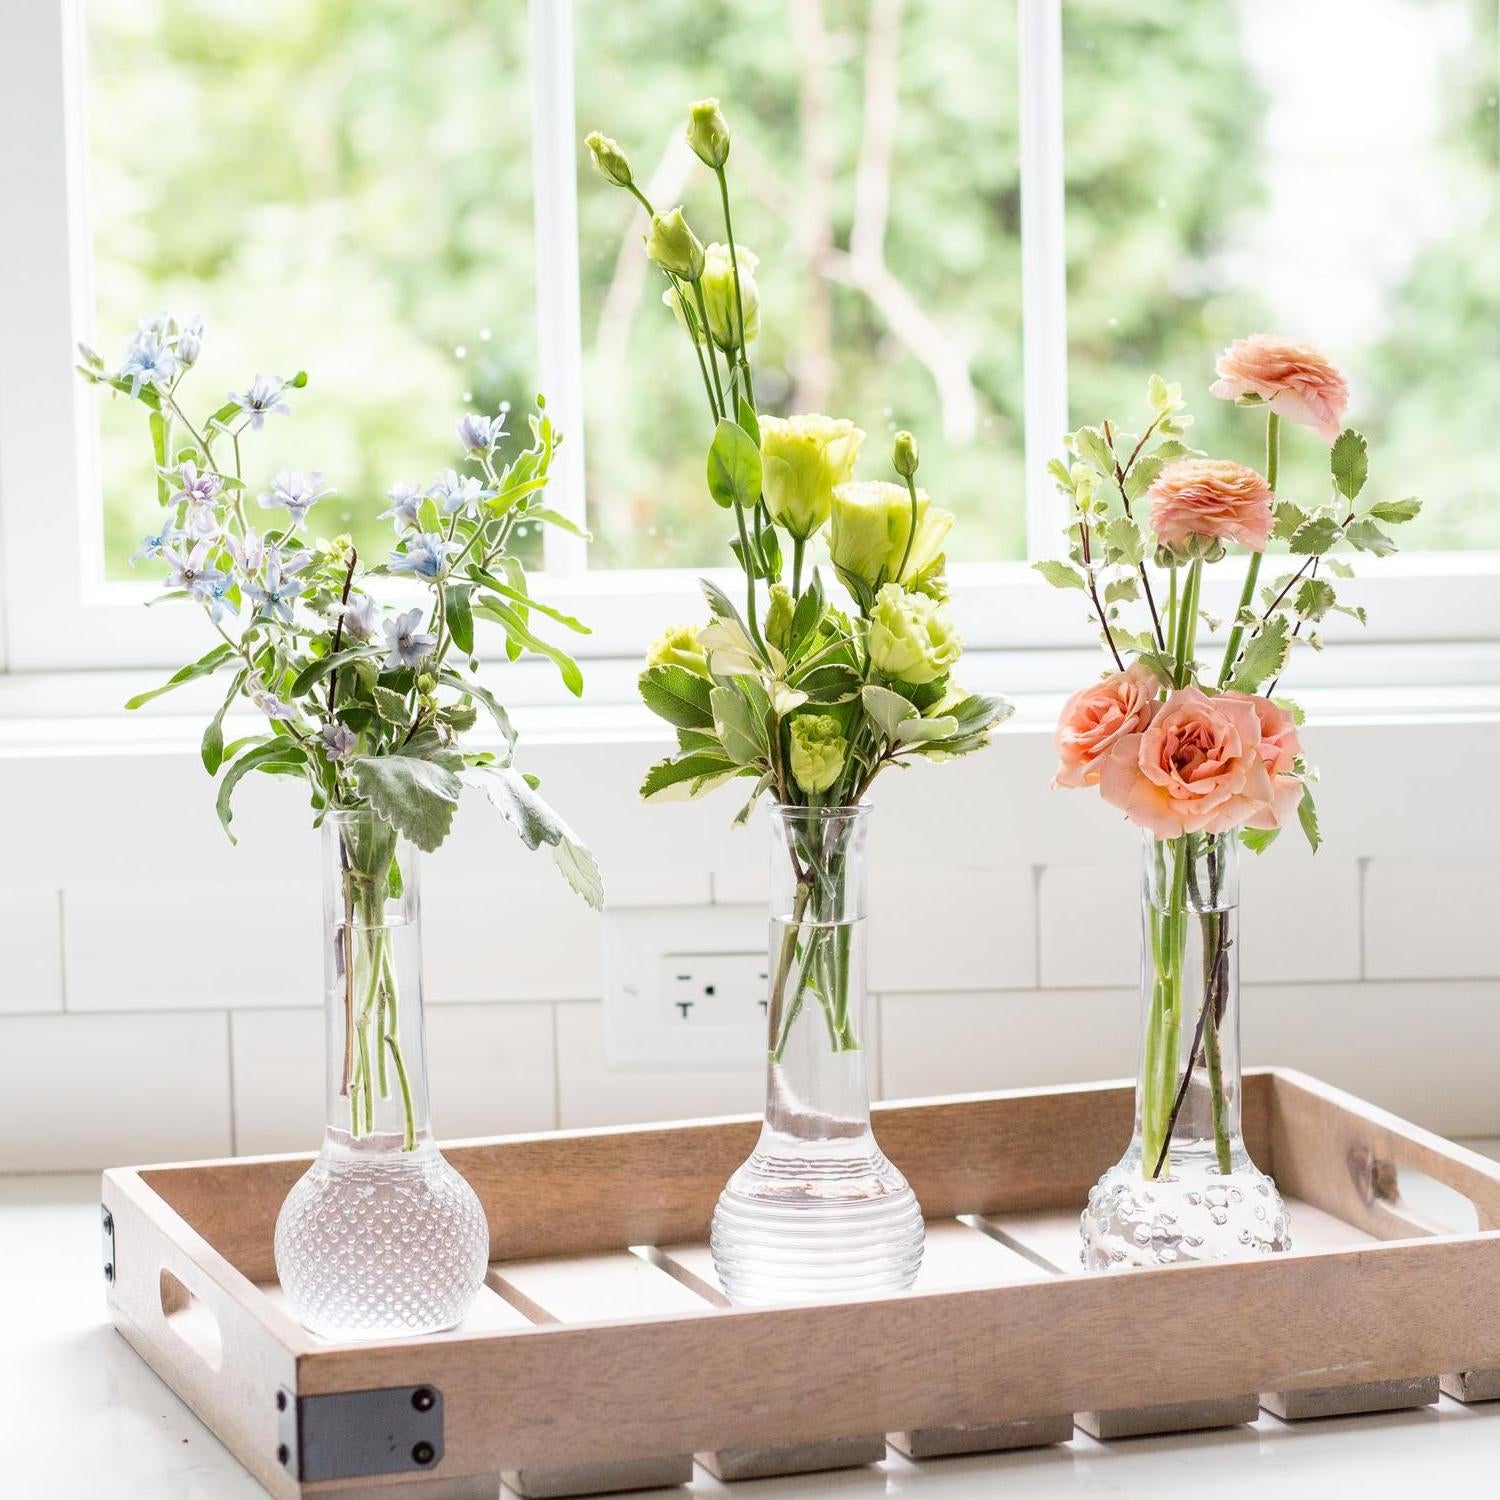 The bud vase assortments are filled with a variety of flowers including blue forget-me-nots, green lisianthus, and peach roses, placed on a wooden tray on a white windowsill, offering a view of green foliage outside.